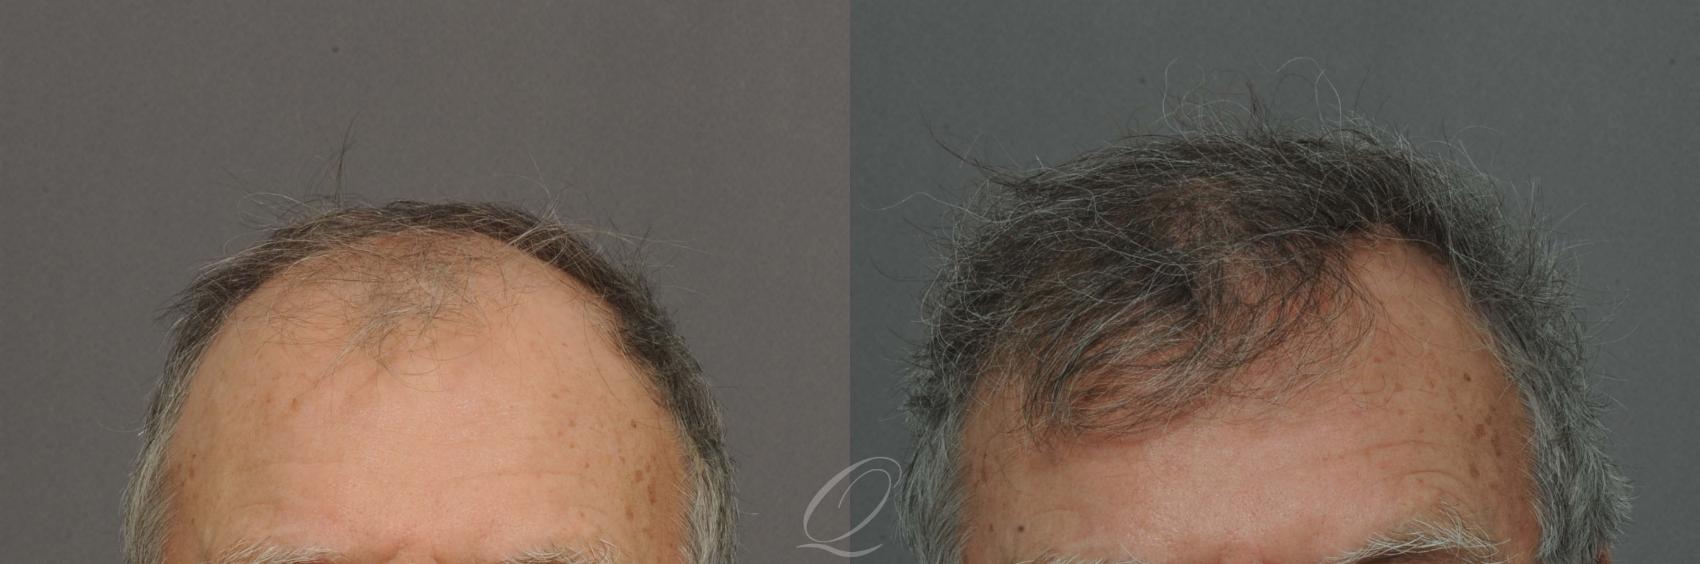 FUT Case 1026 Before & After View #1 | Rochester, NY | Quatela Center for Hair Restoration